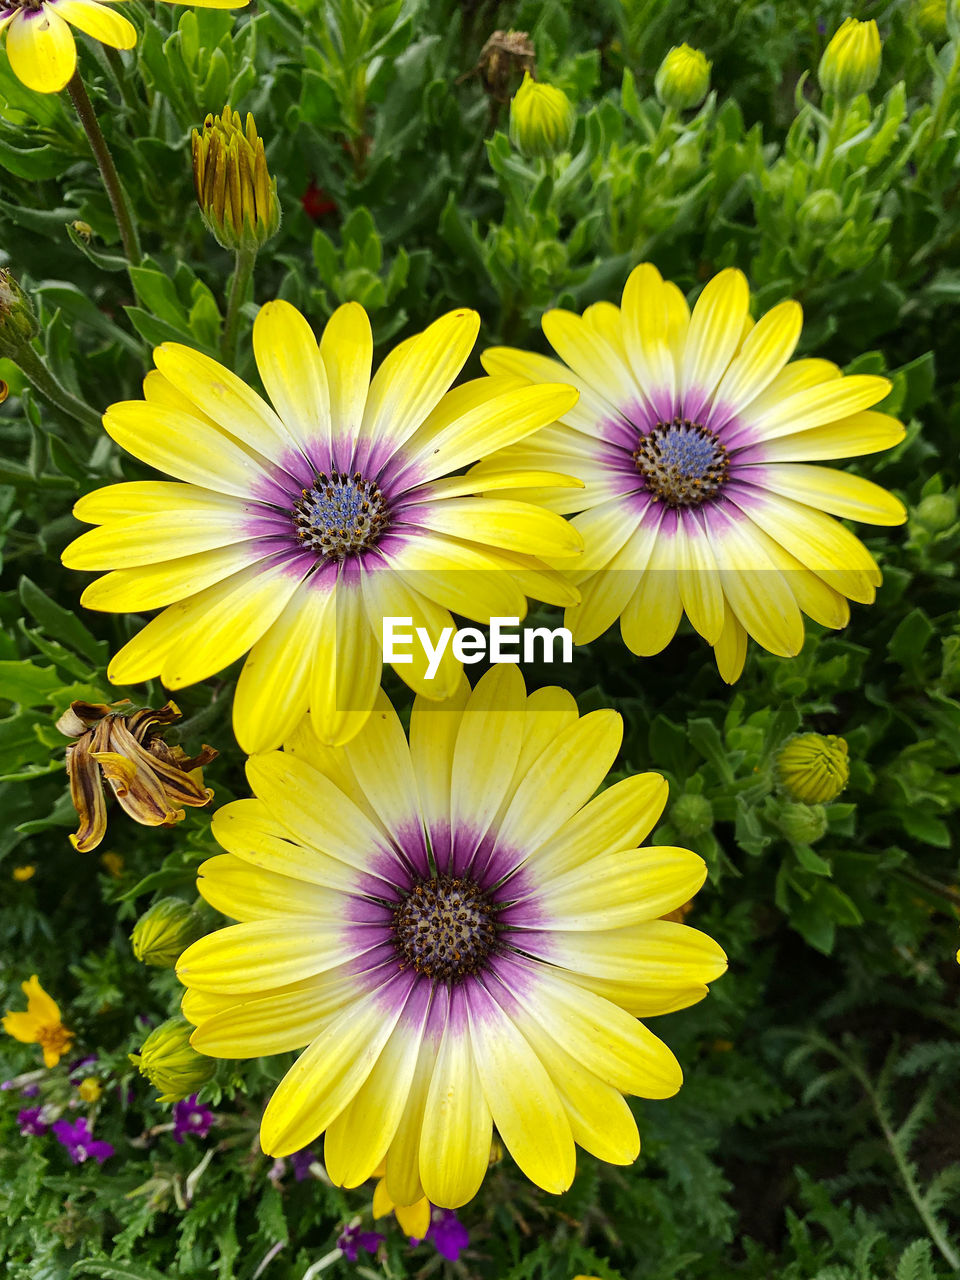 flower, flowering plant, plant, freshness, beauty in nature, growth, flower head, petal, fragility, inflorescence, yellow, close-up, nature, no people, pollen, high angle view, botany, day, field, outdoors, springtime, green, purple, land, blossom, vibrant color